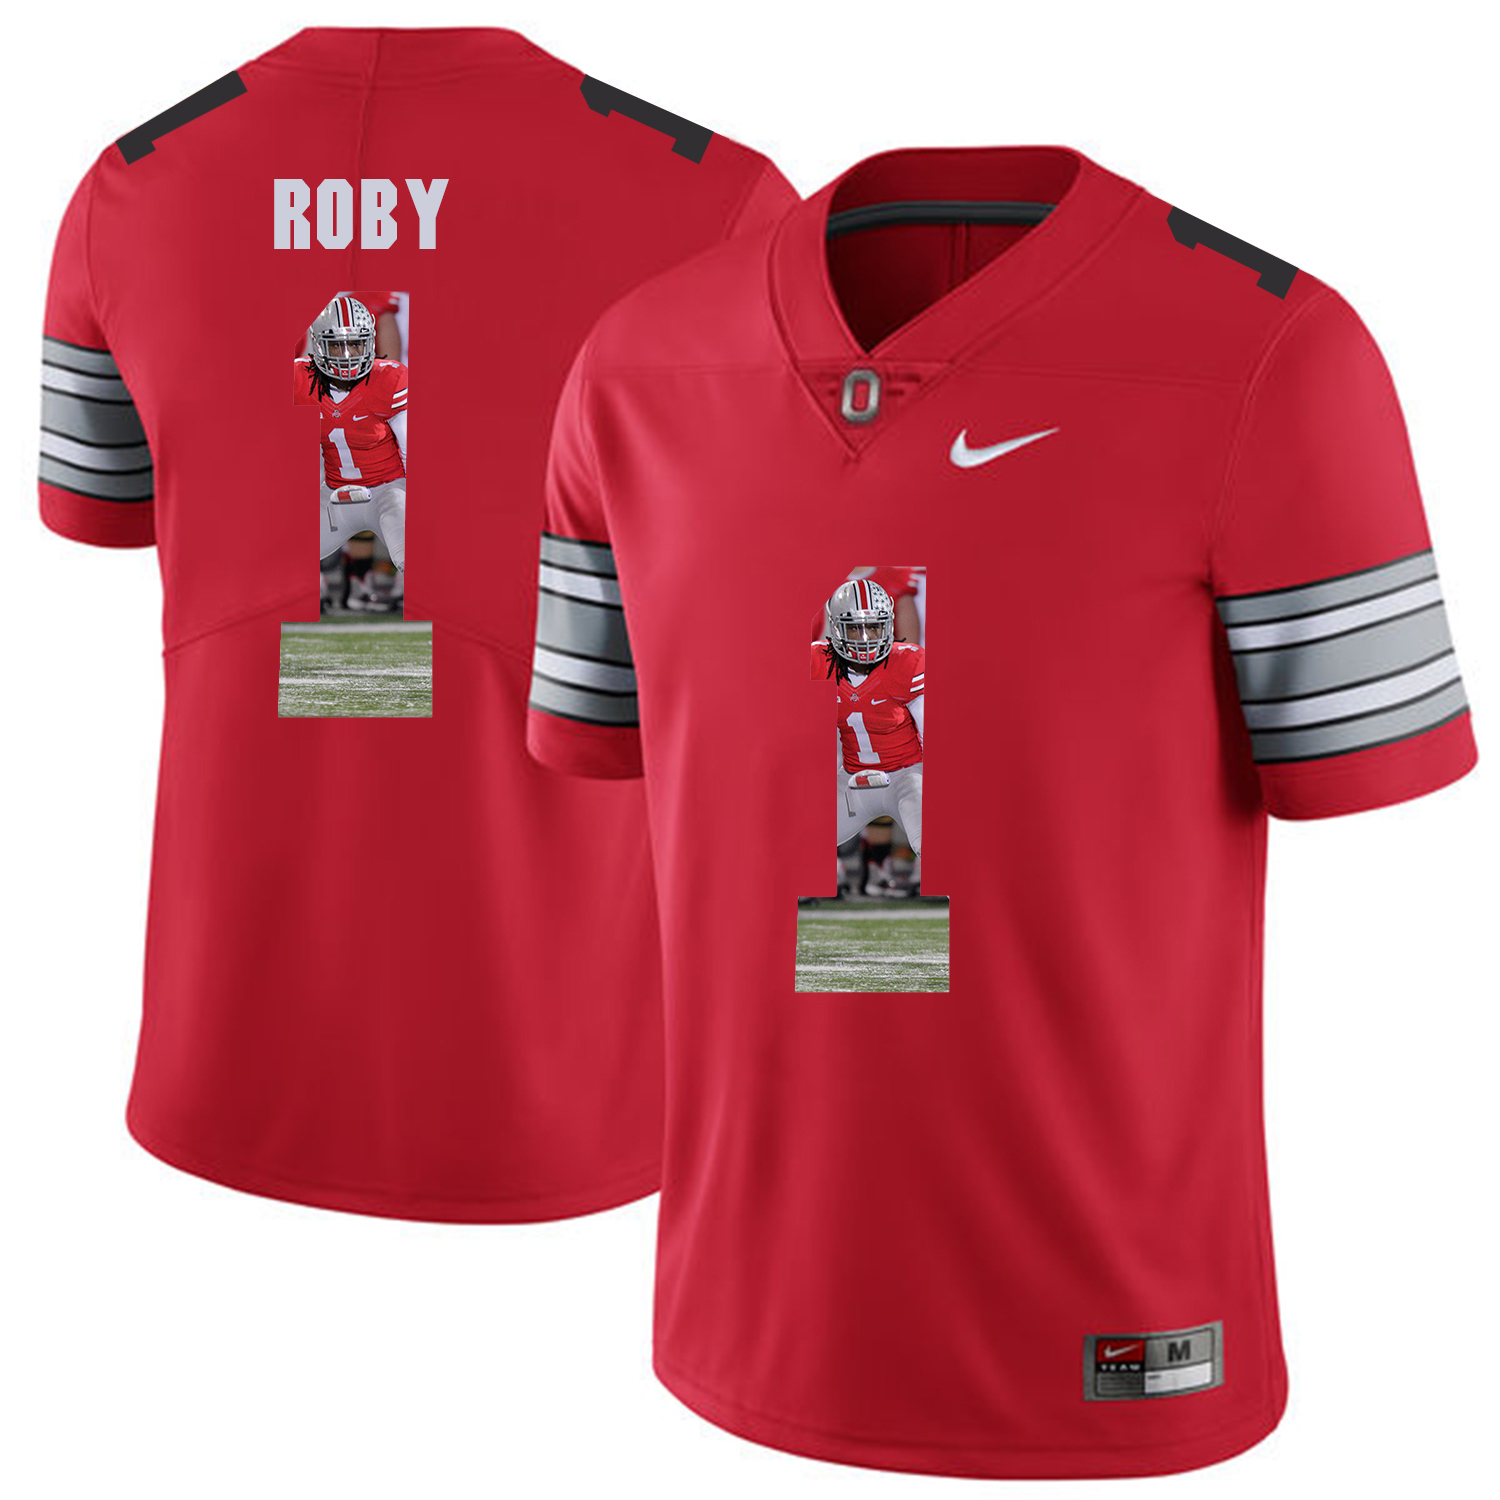 Men Ohio State 1 Roby Red Fashion Edition Customized NCAA Jerseys